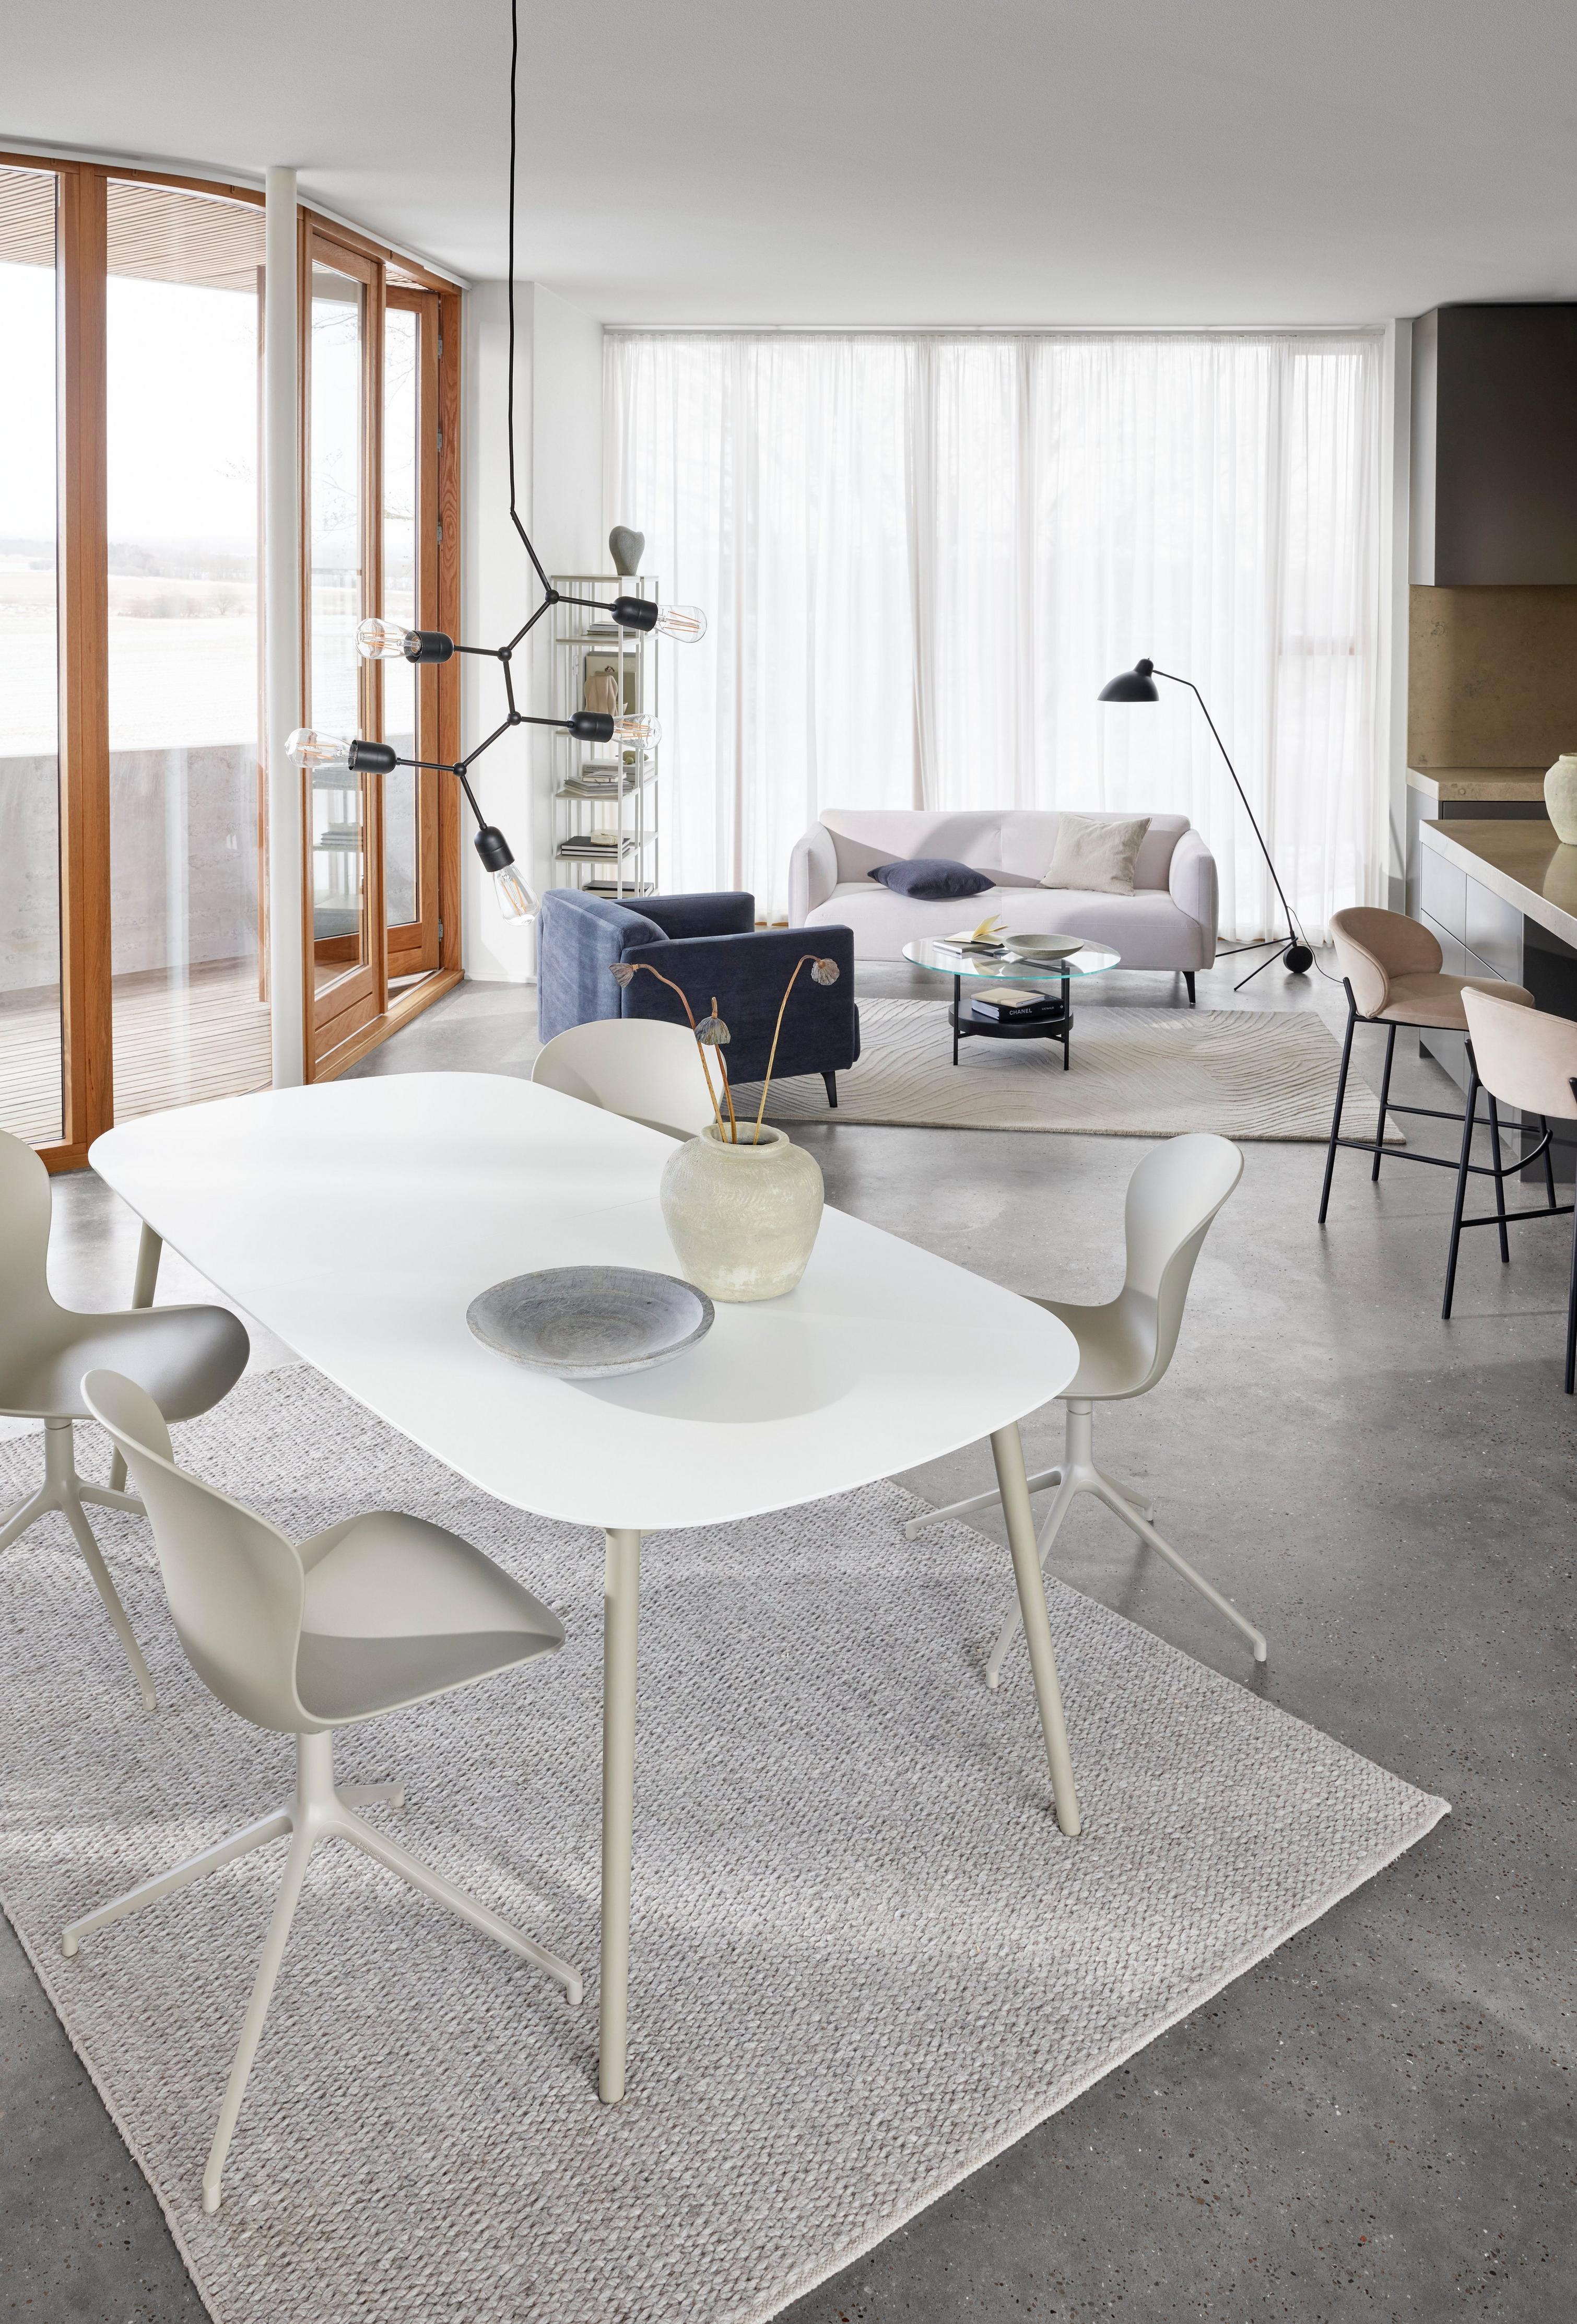 Kingston table in a matt white lacquered finish with the Princeton barstool and the Moderna 2,5 seater sofa in the background.